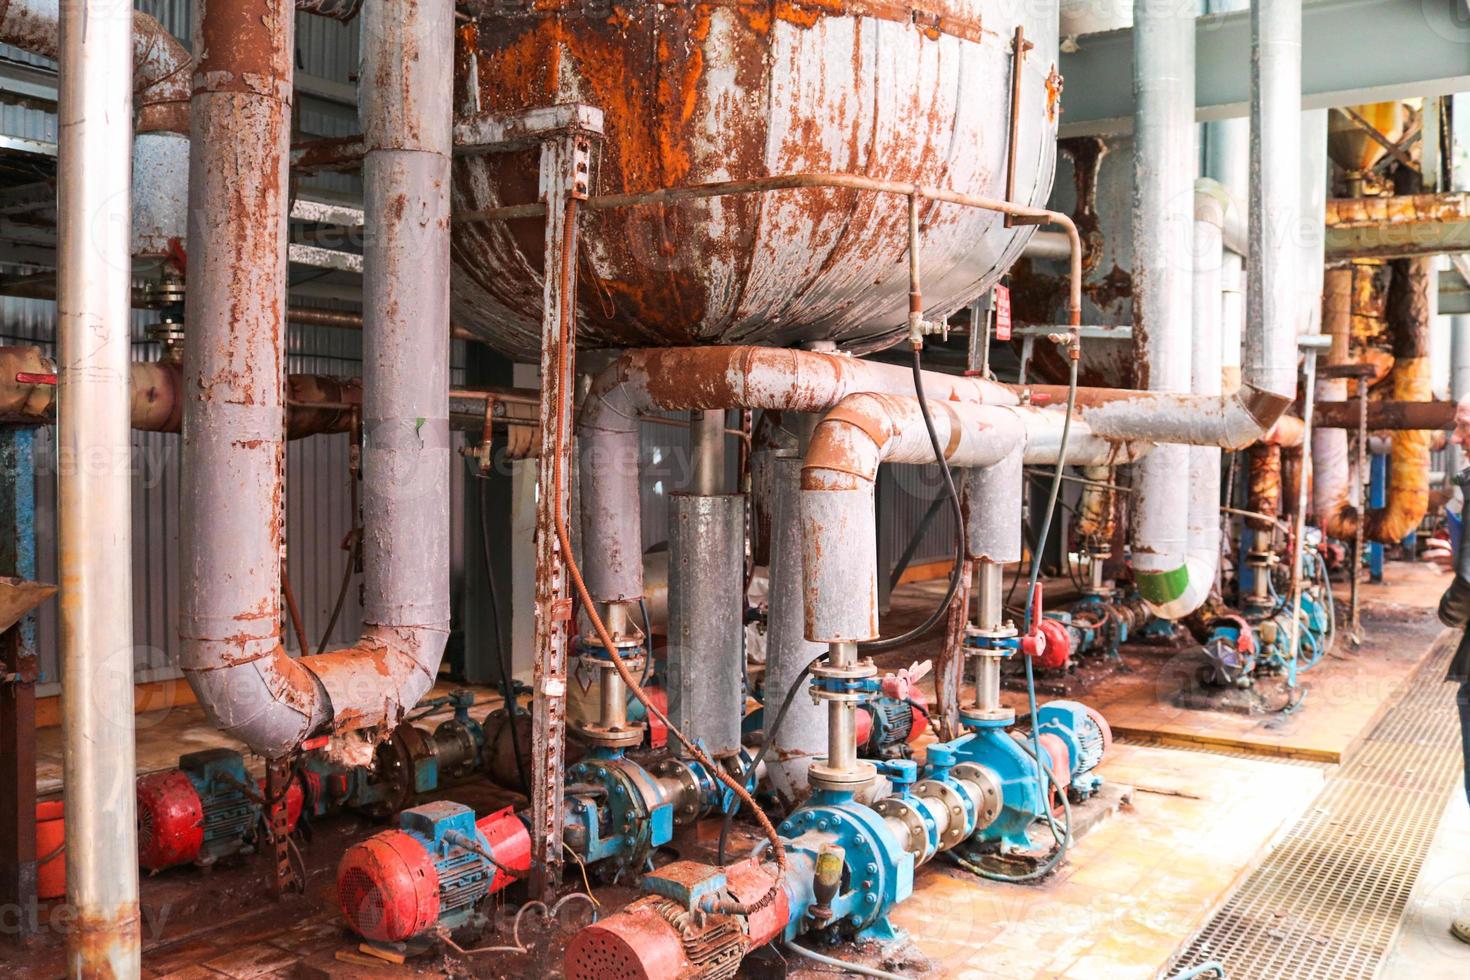 Iron metal centrifugal pumps equipment and pipes with flanges and valves for pumping liquid fuel products at the industrial refinery chemical petrochemical plant shop photo